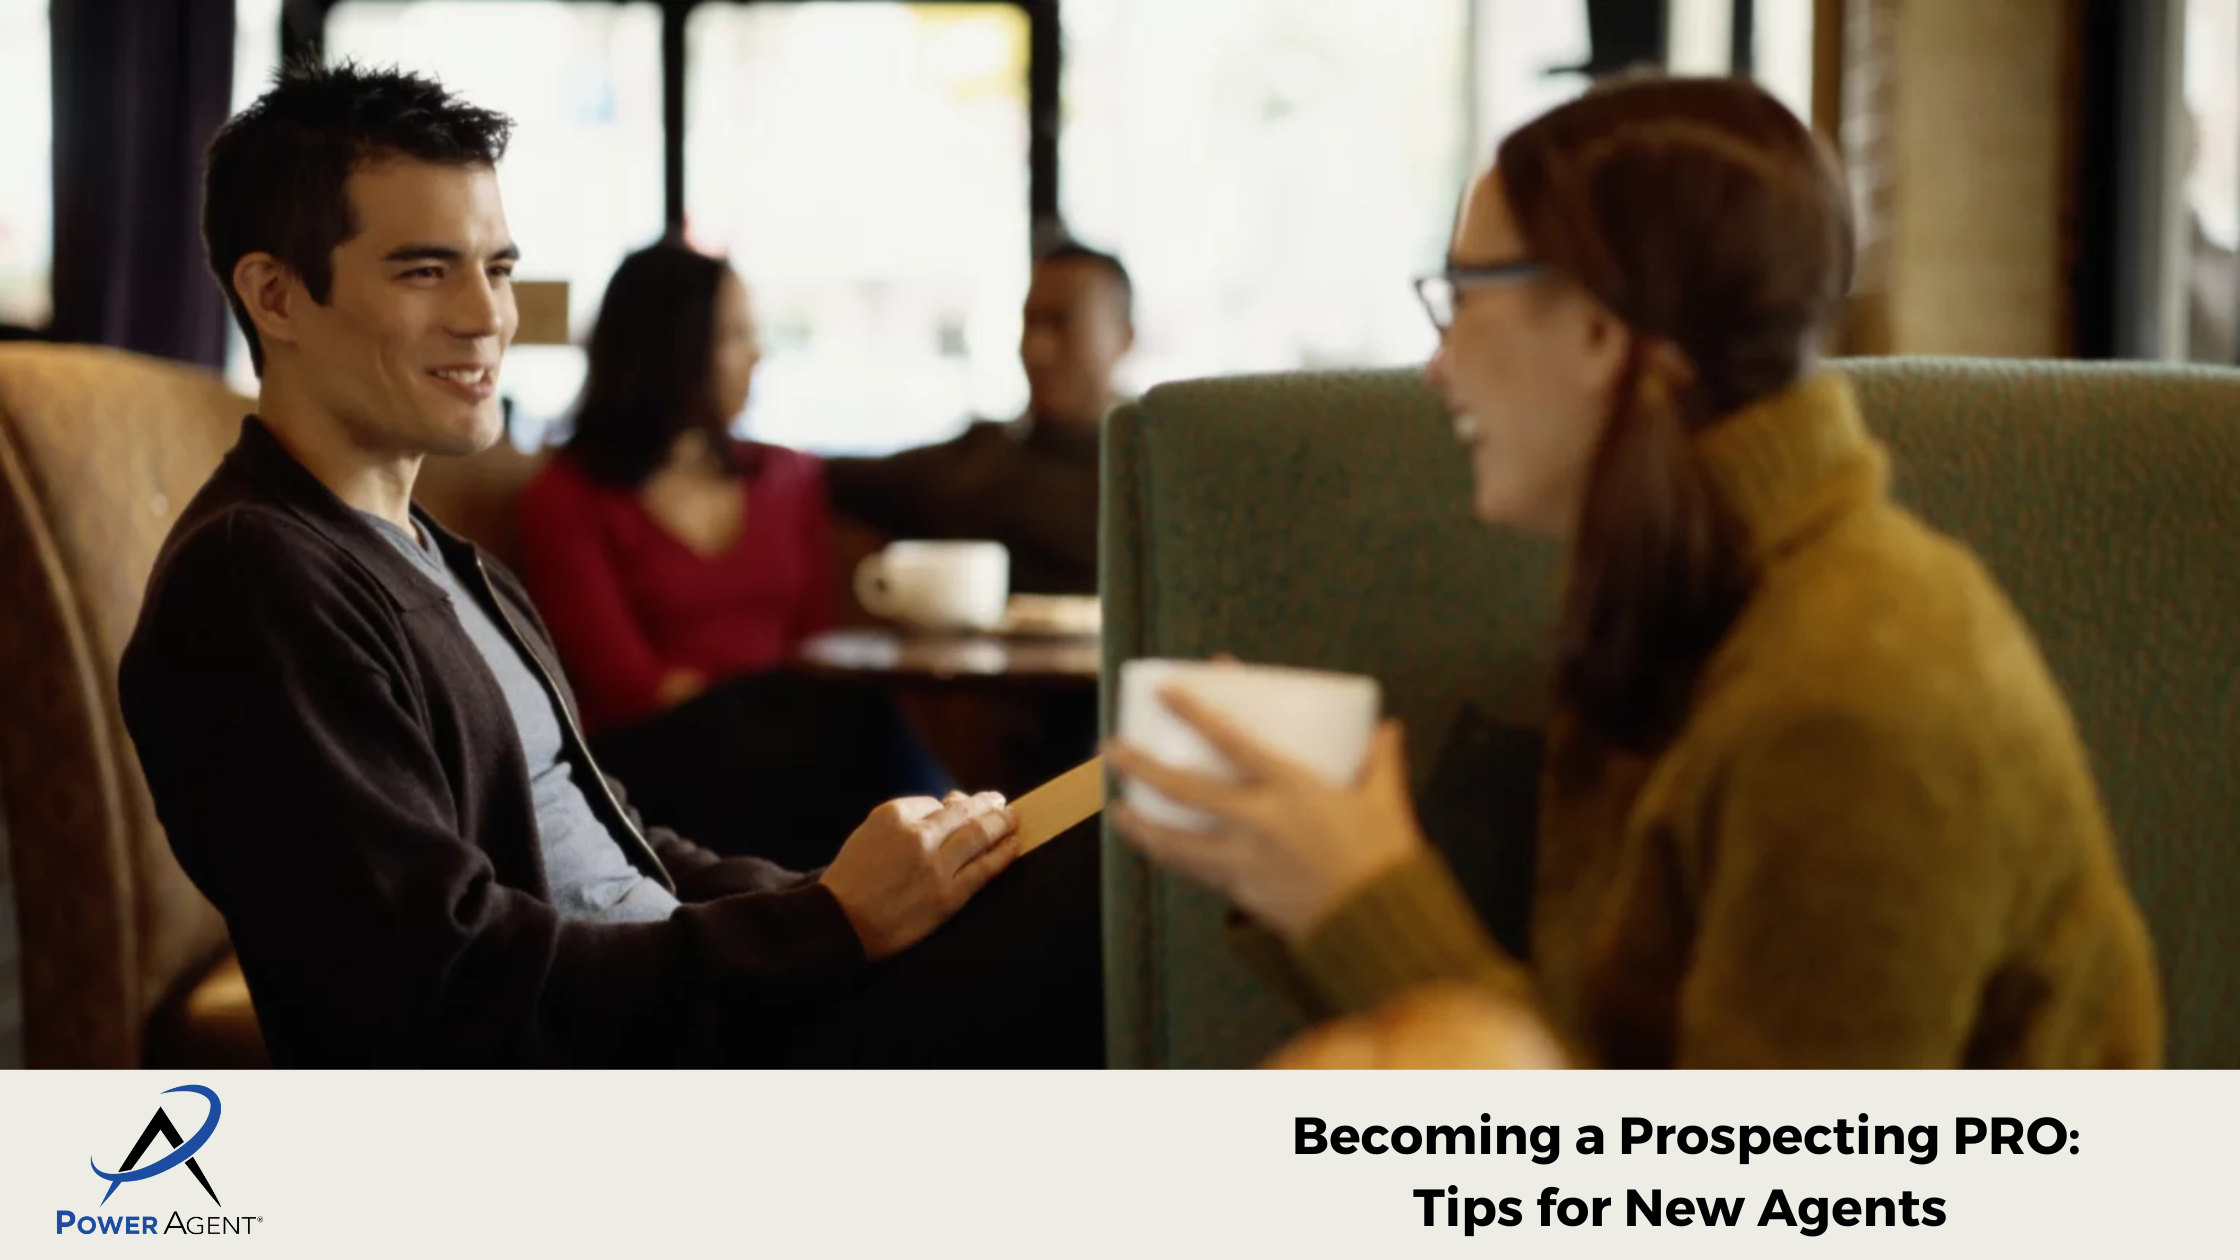 Becoming a Prospecting PRO: Tips for New Agents